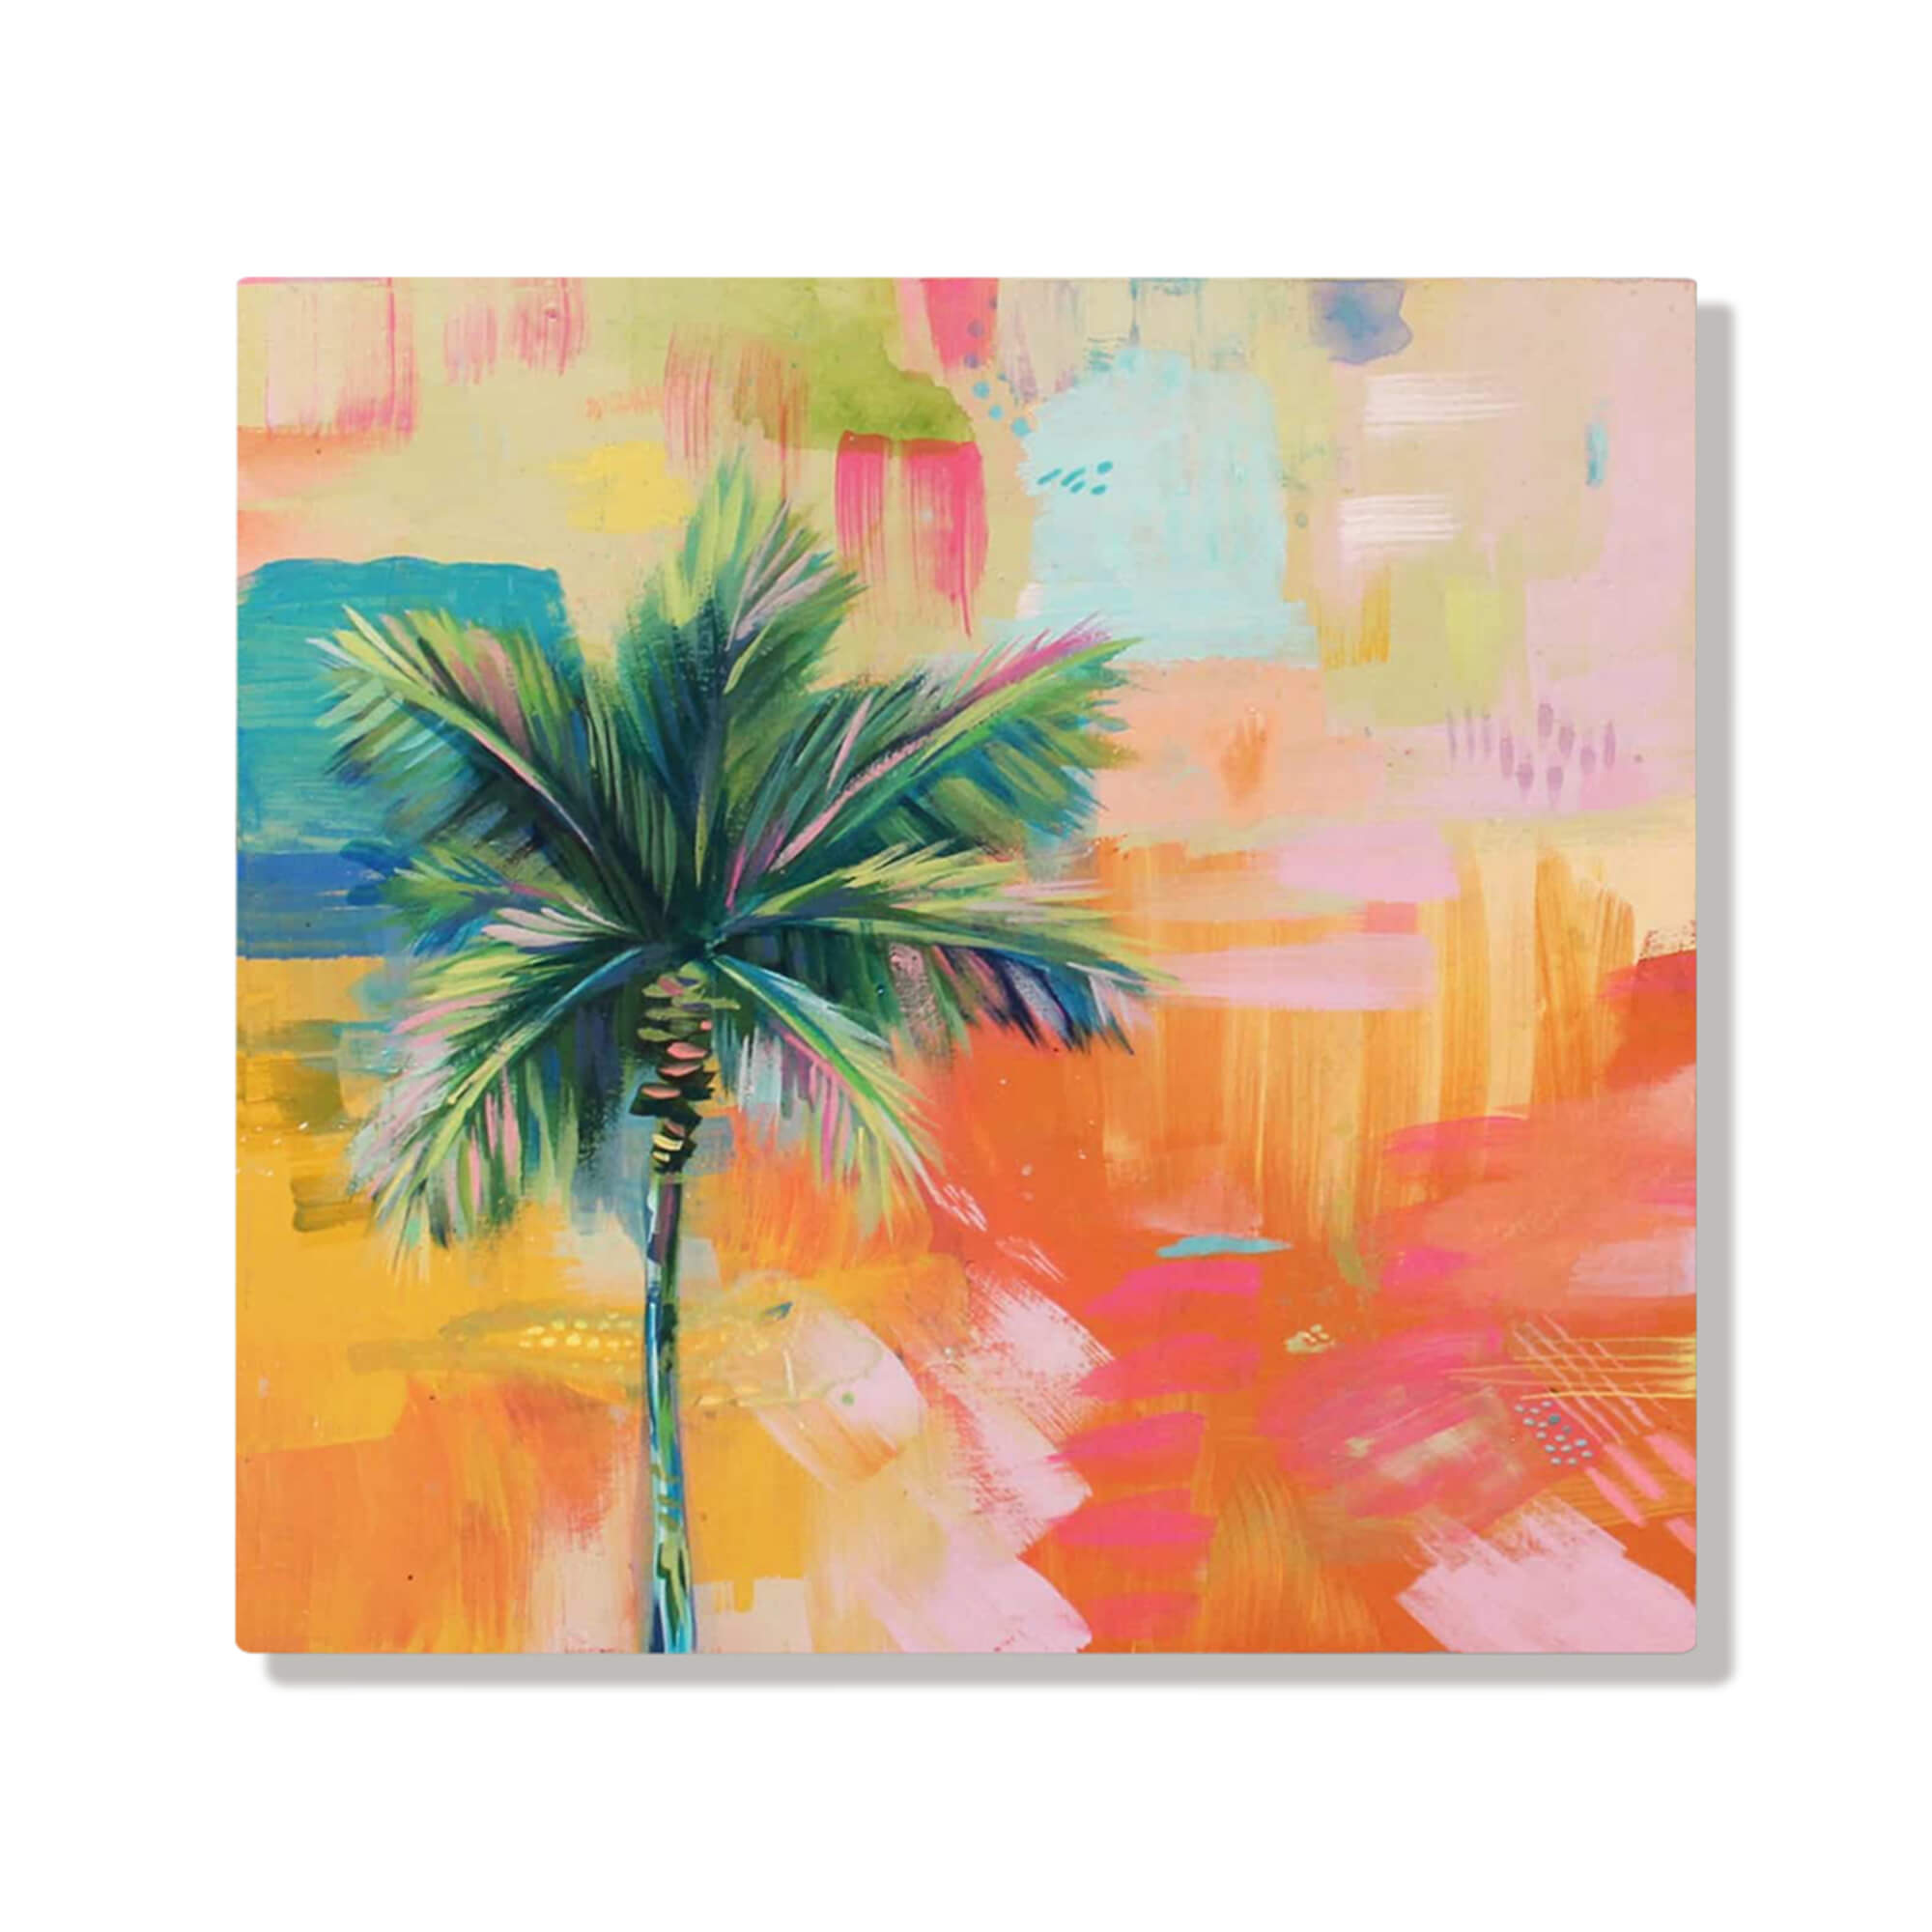 A metal art print  of a palm tree against an orange, pink and blue multi-layered backdrop by Hawaii artist Lauren Roth